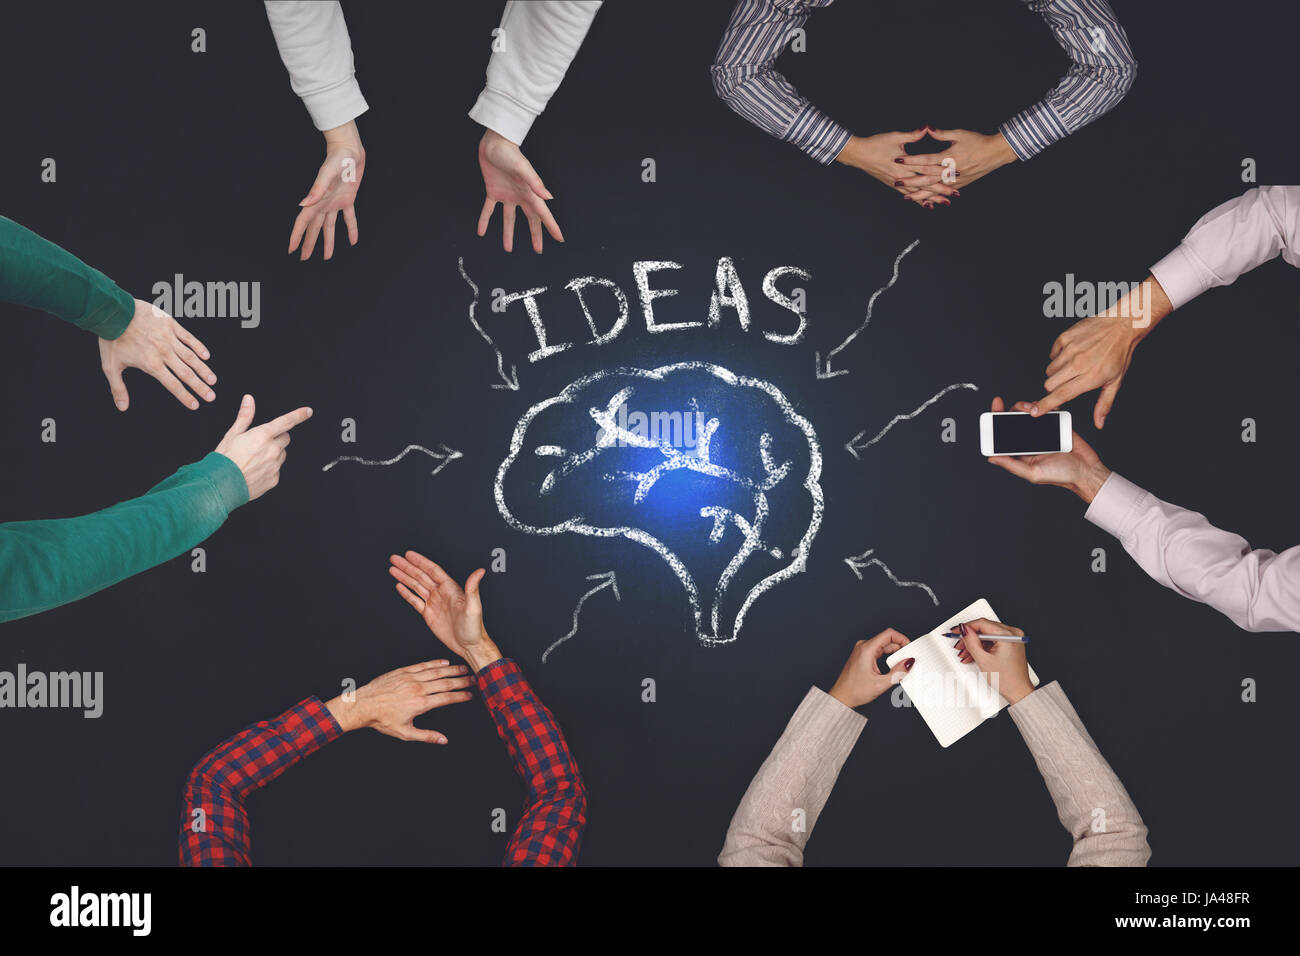 Teamwork concept - top view of six people generate ideas. Stock Photo